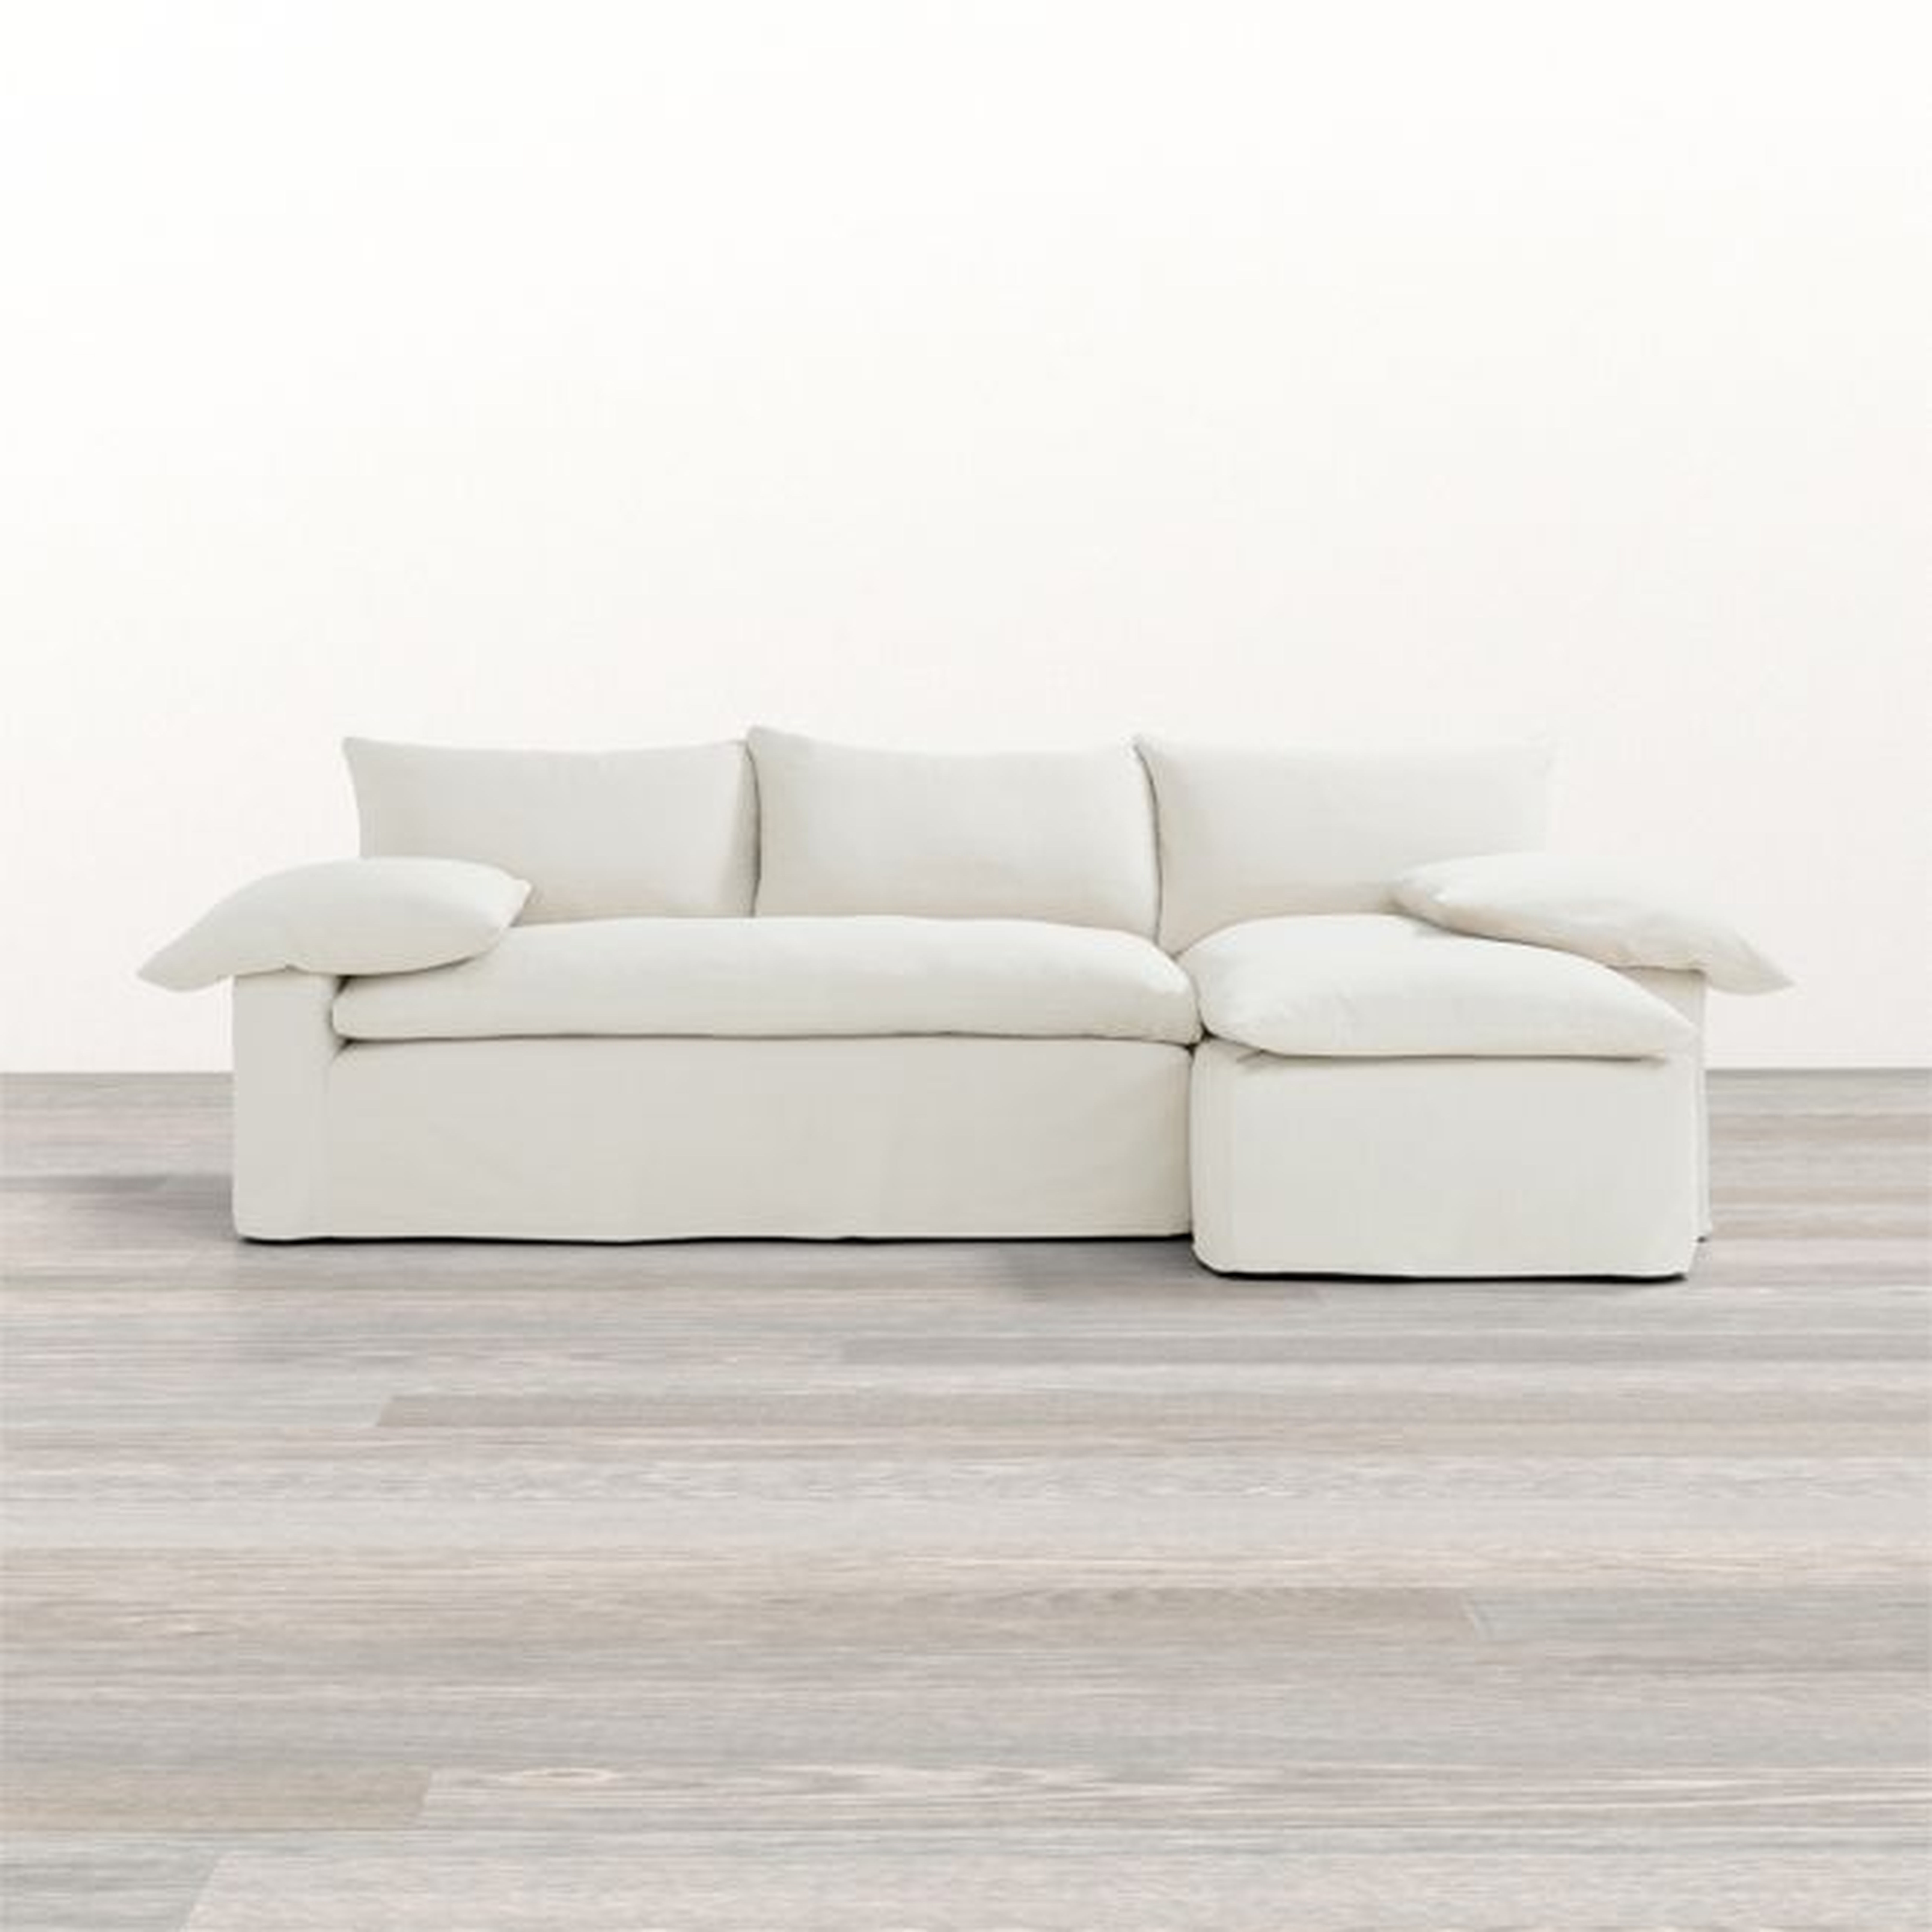 Ever Slipcovered 2-Piece Sectional Sofa with Right Arm Chaise by Leanne Ford - Crate and Barrel